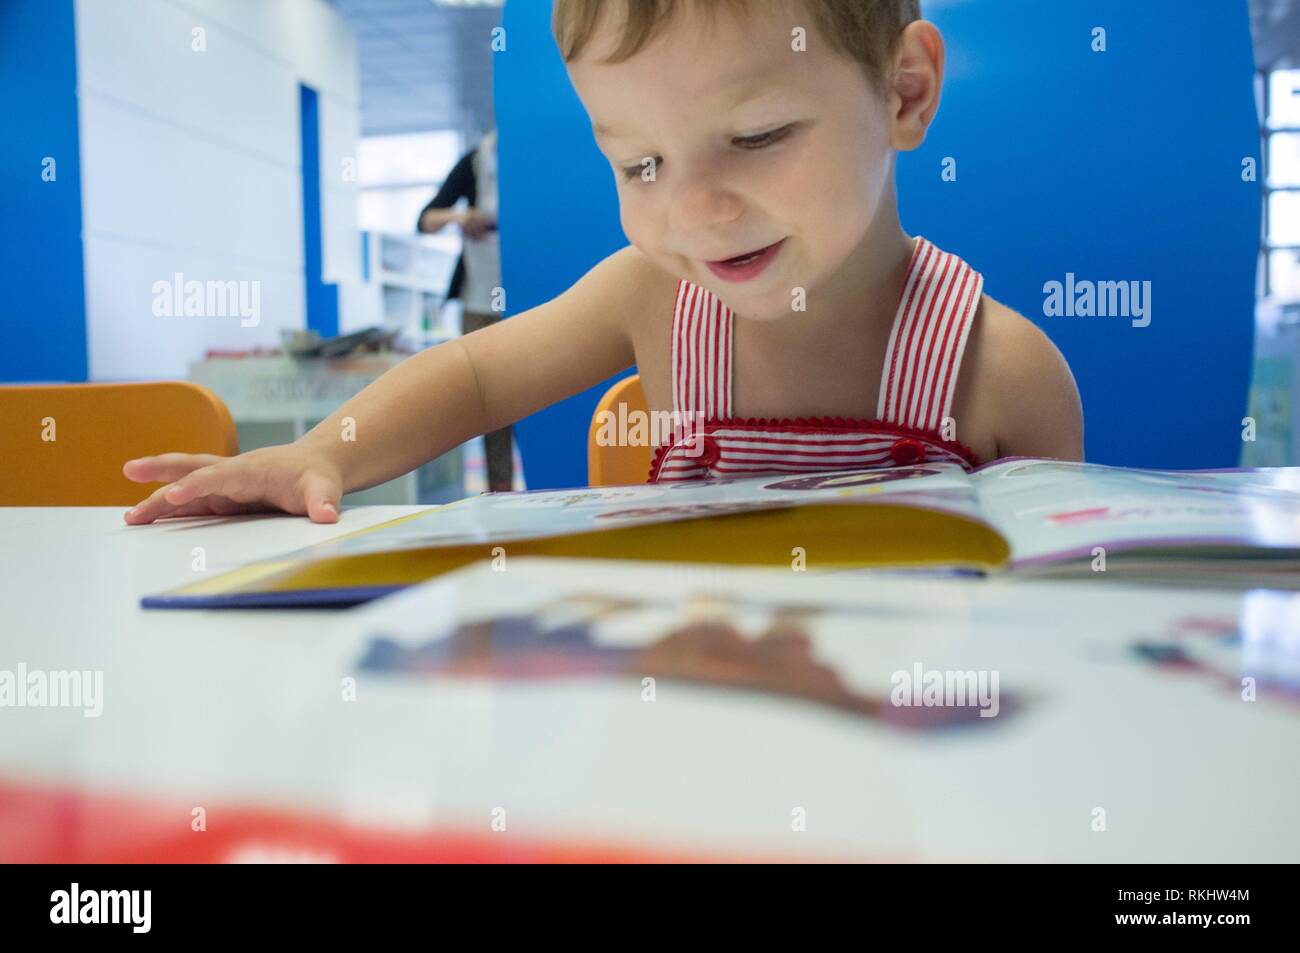 Adorable 2 years boy browsing stories at library. Enjoying the books at his first visit at preschool library. Stock Photo